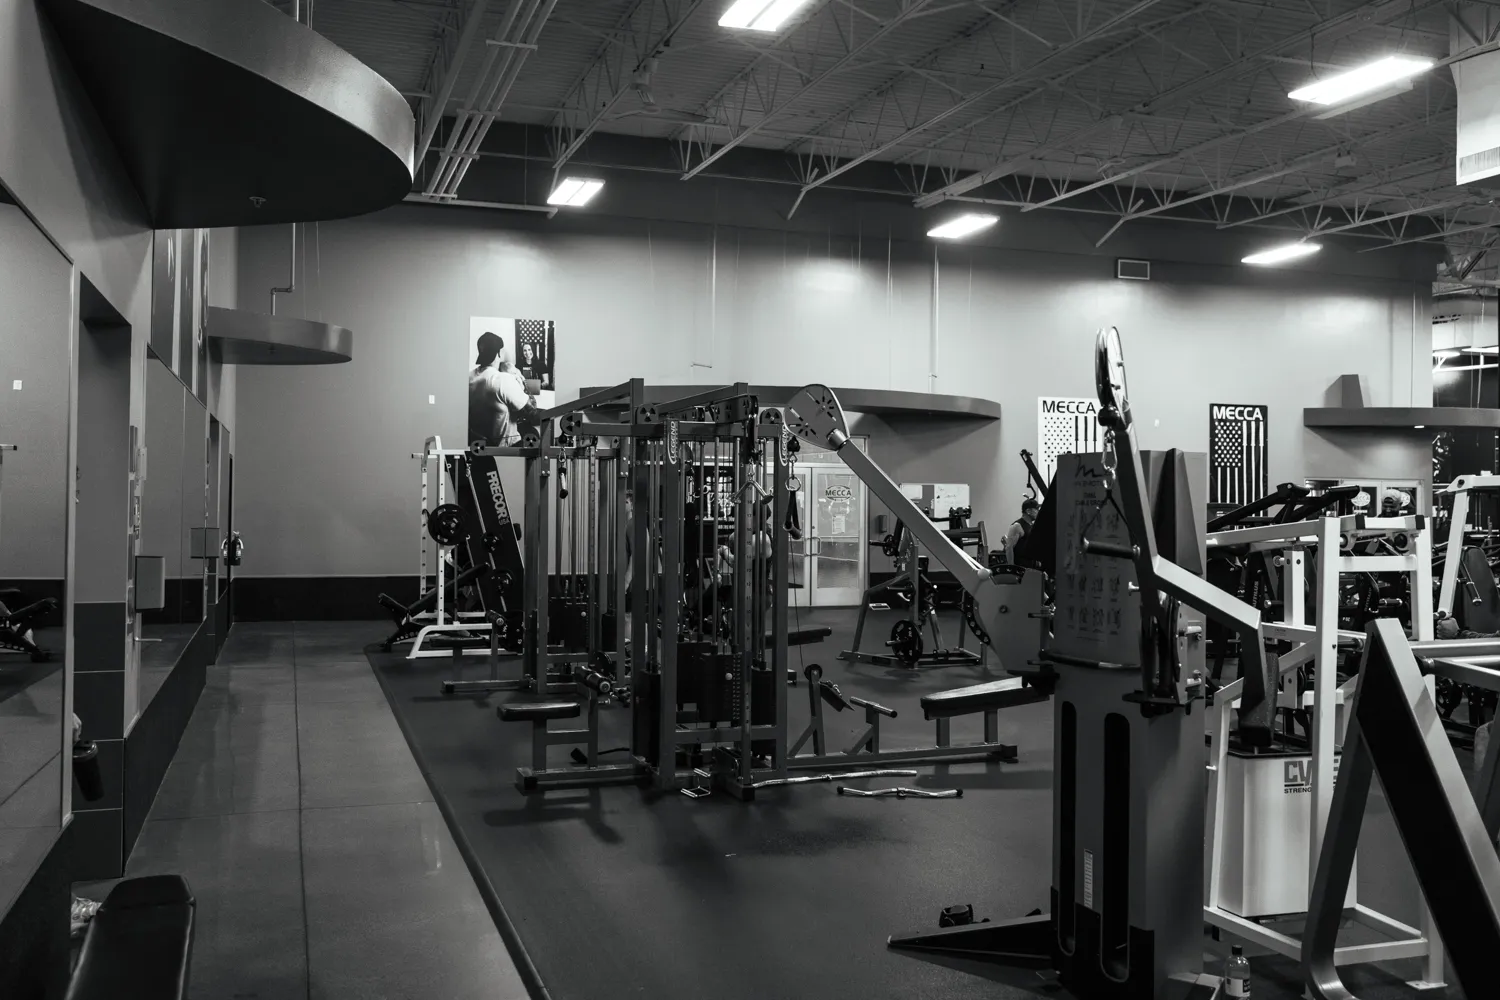 workout machines at The Mecca Gym located in Boise, Idaho.